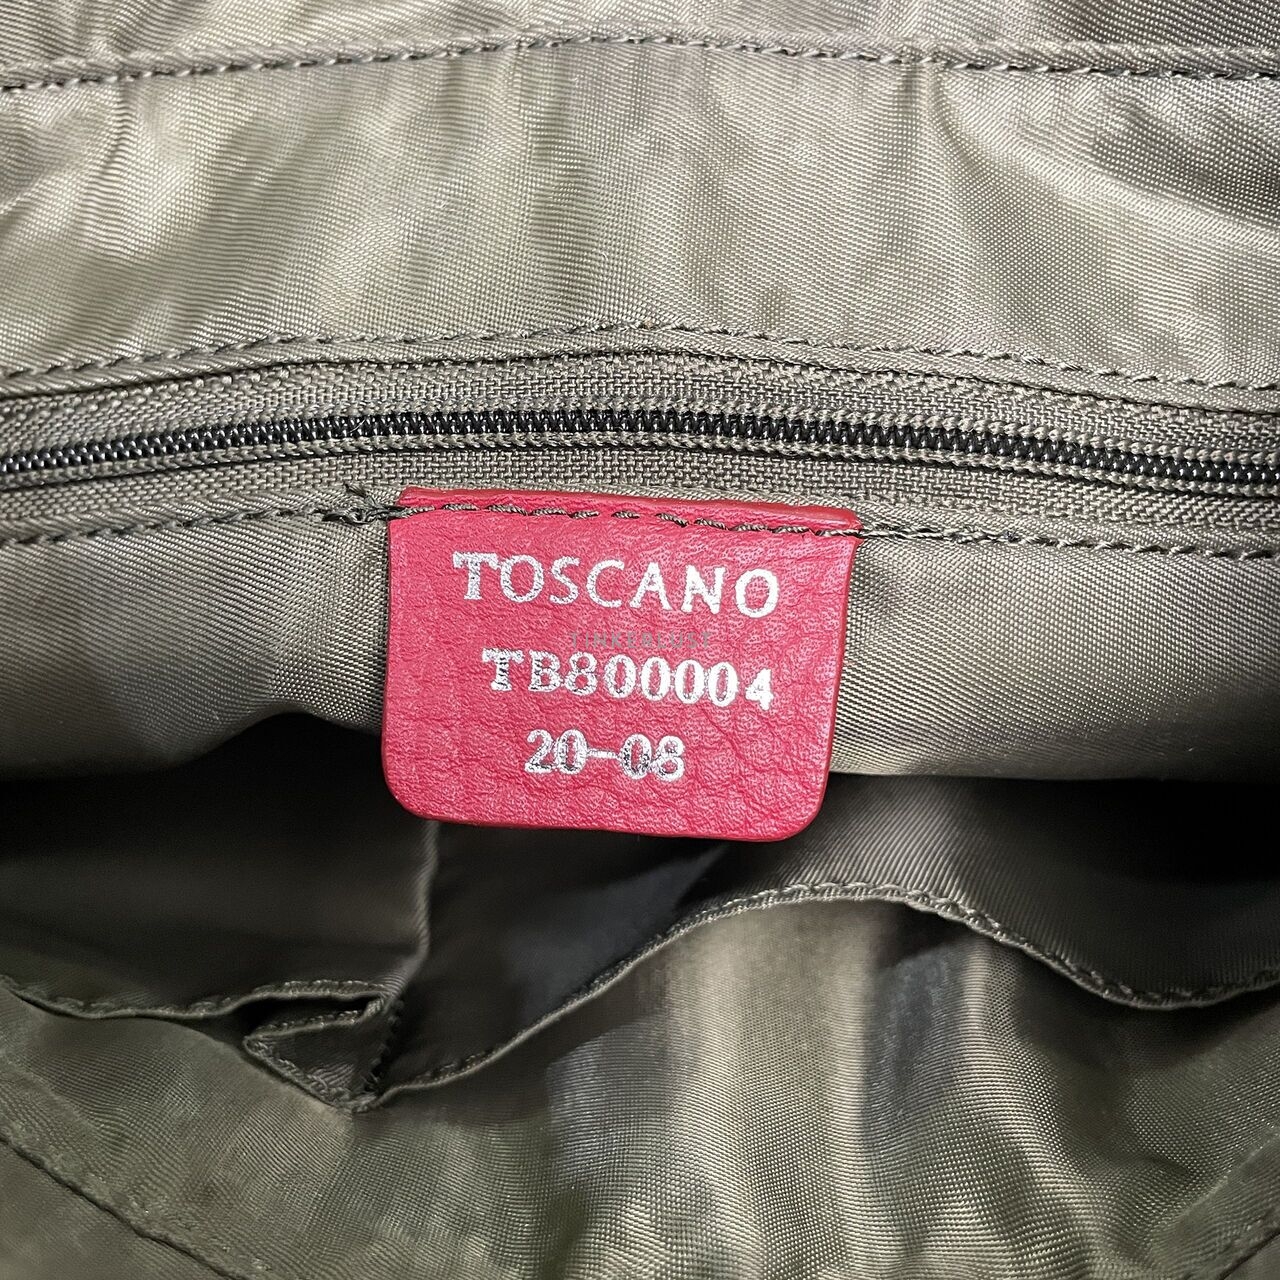 Tocco Toscano Red Sling Bag